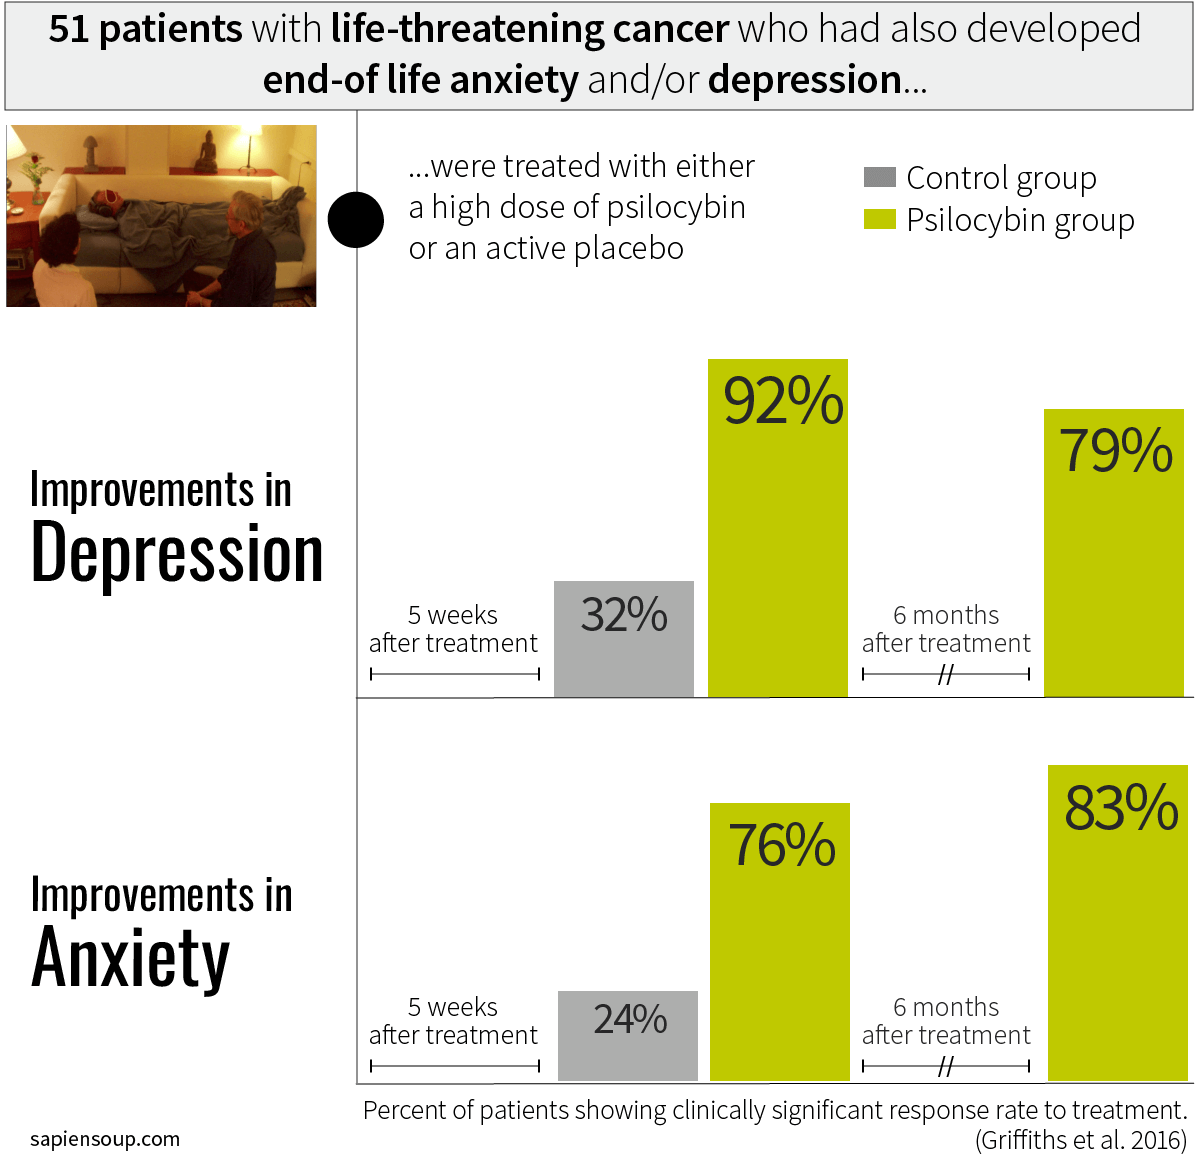 psilocybin-in-end-of-life-anxiety-depression@2x.png